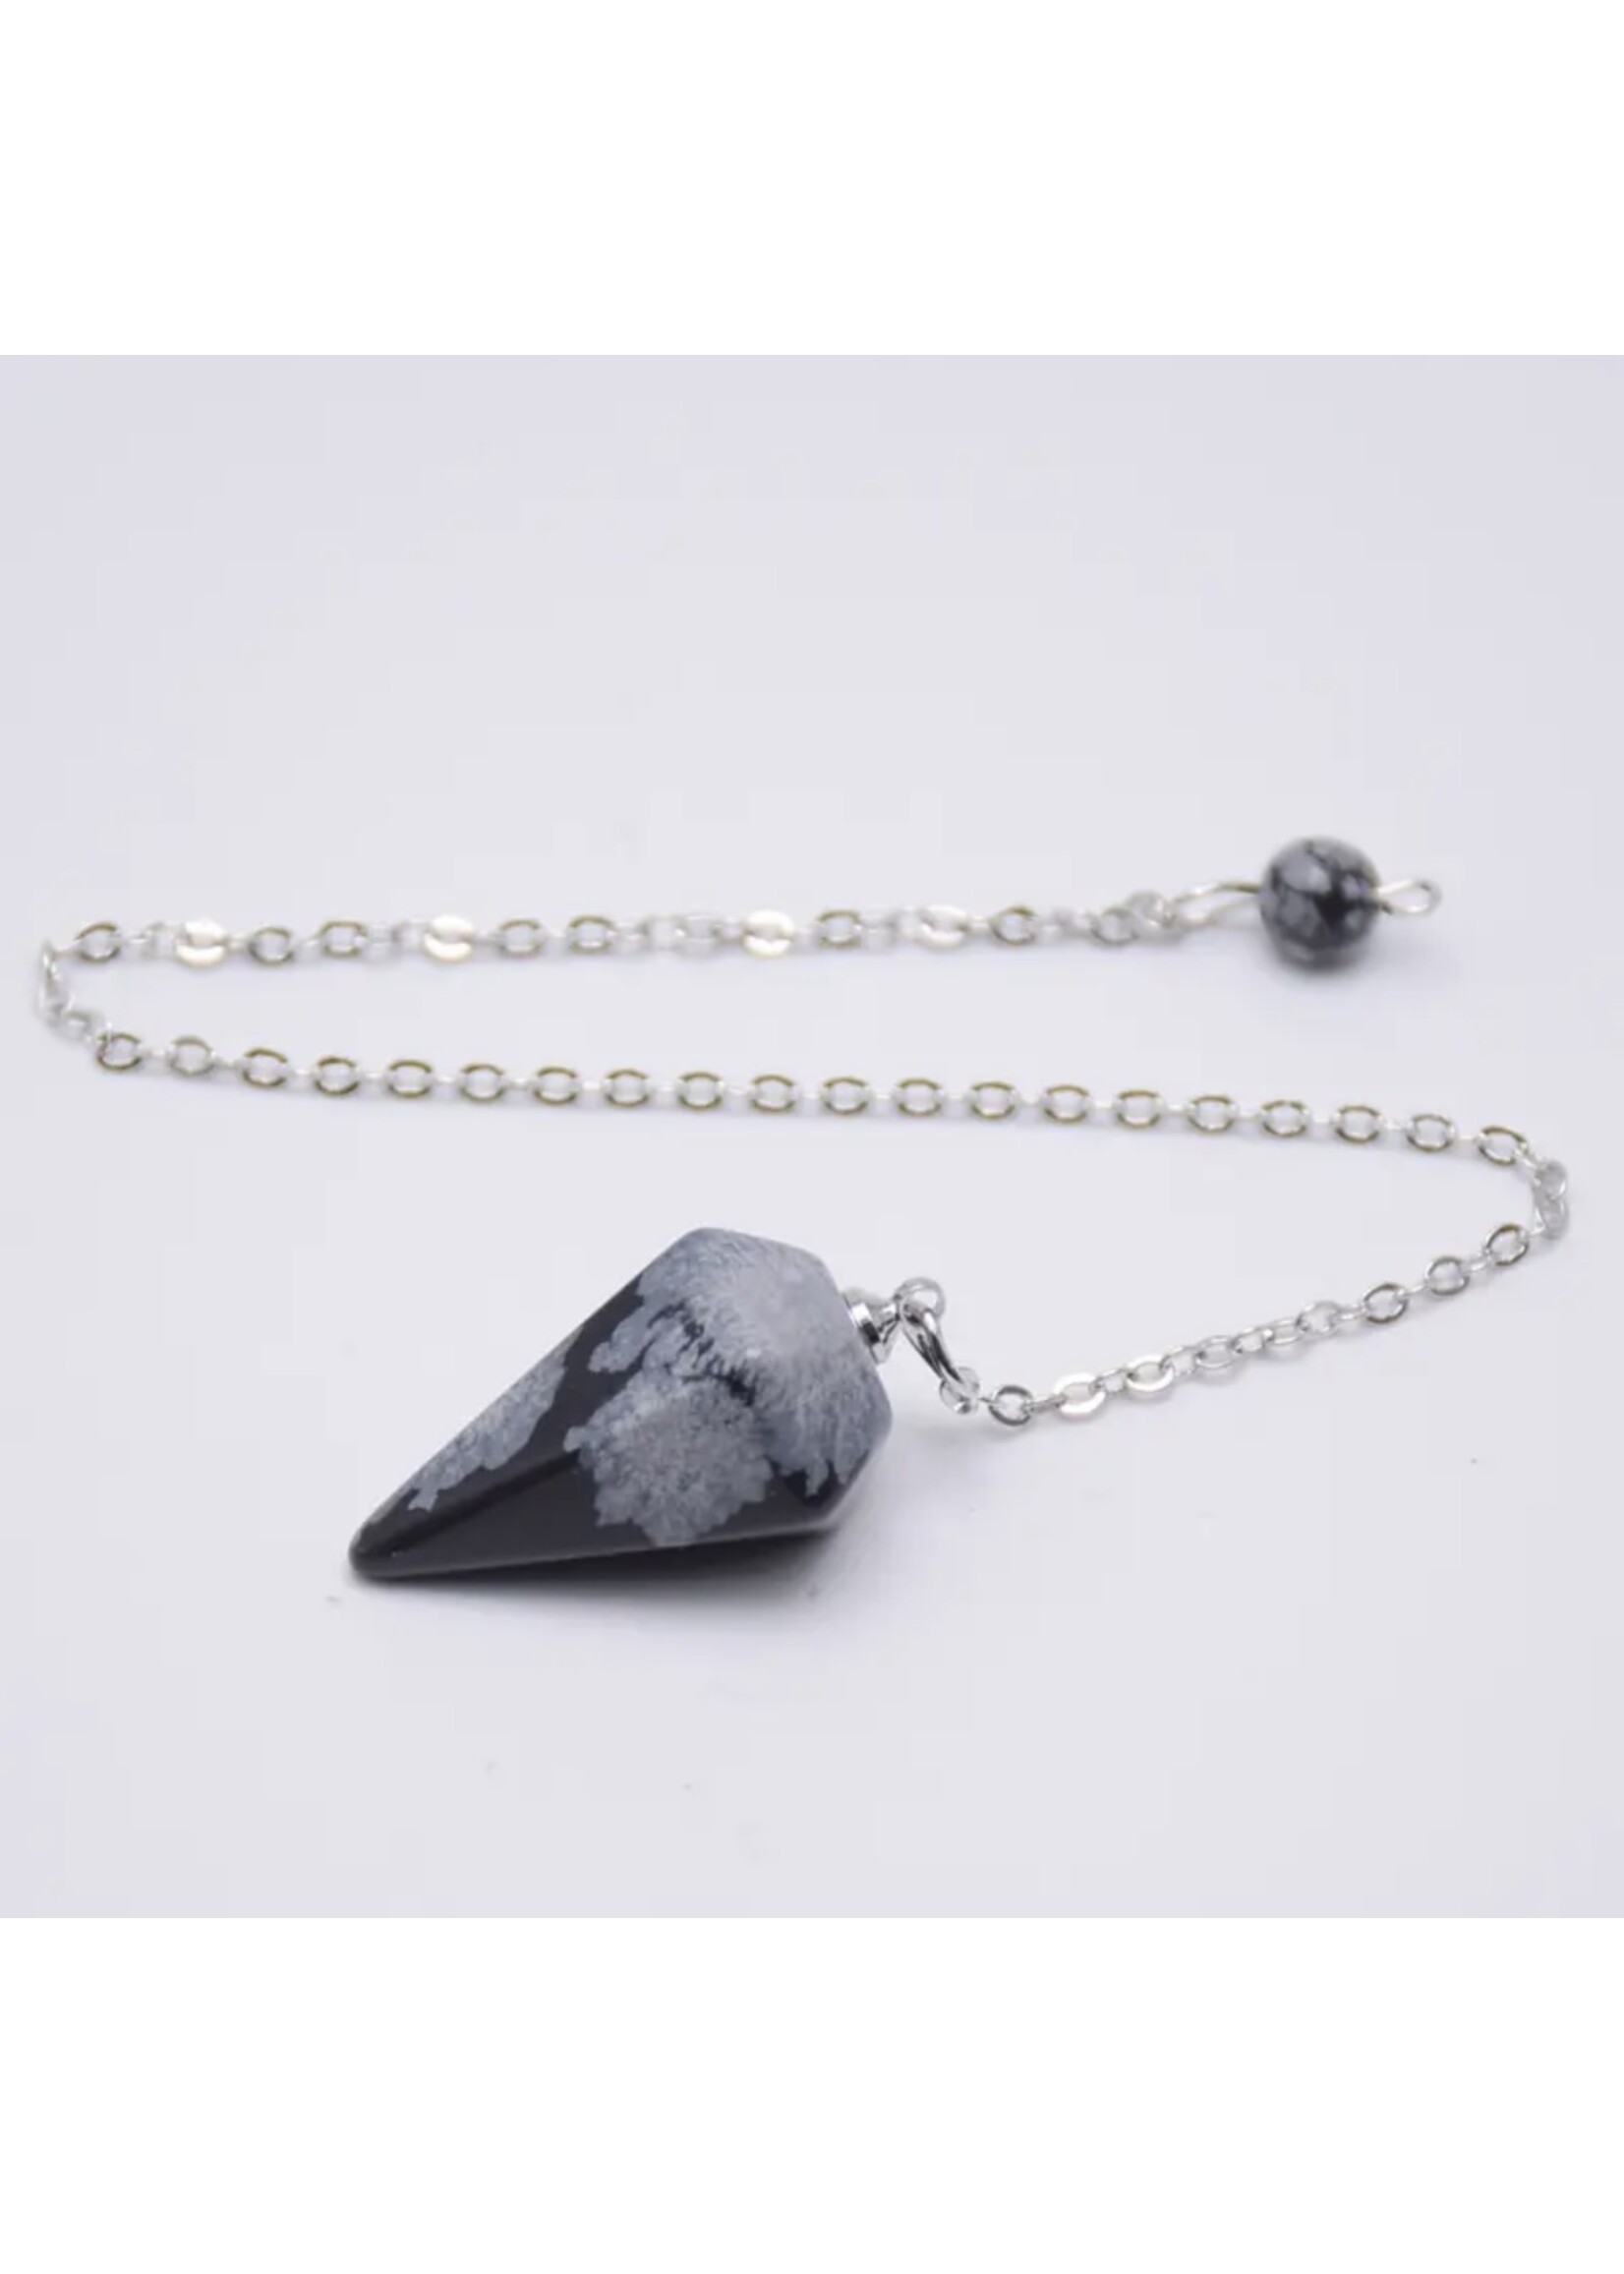 Compact Hexagonal Crystal Pendulum- Ideal for Chakra Healing, Dowsing, and Energy Alignment